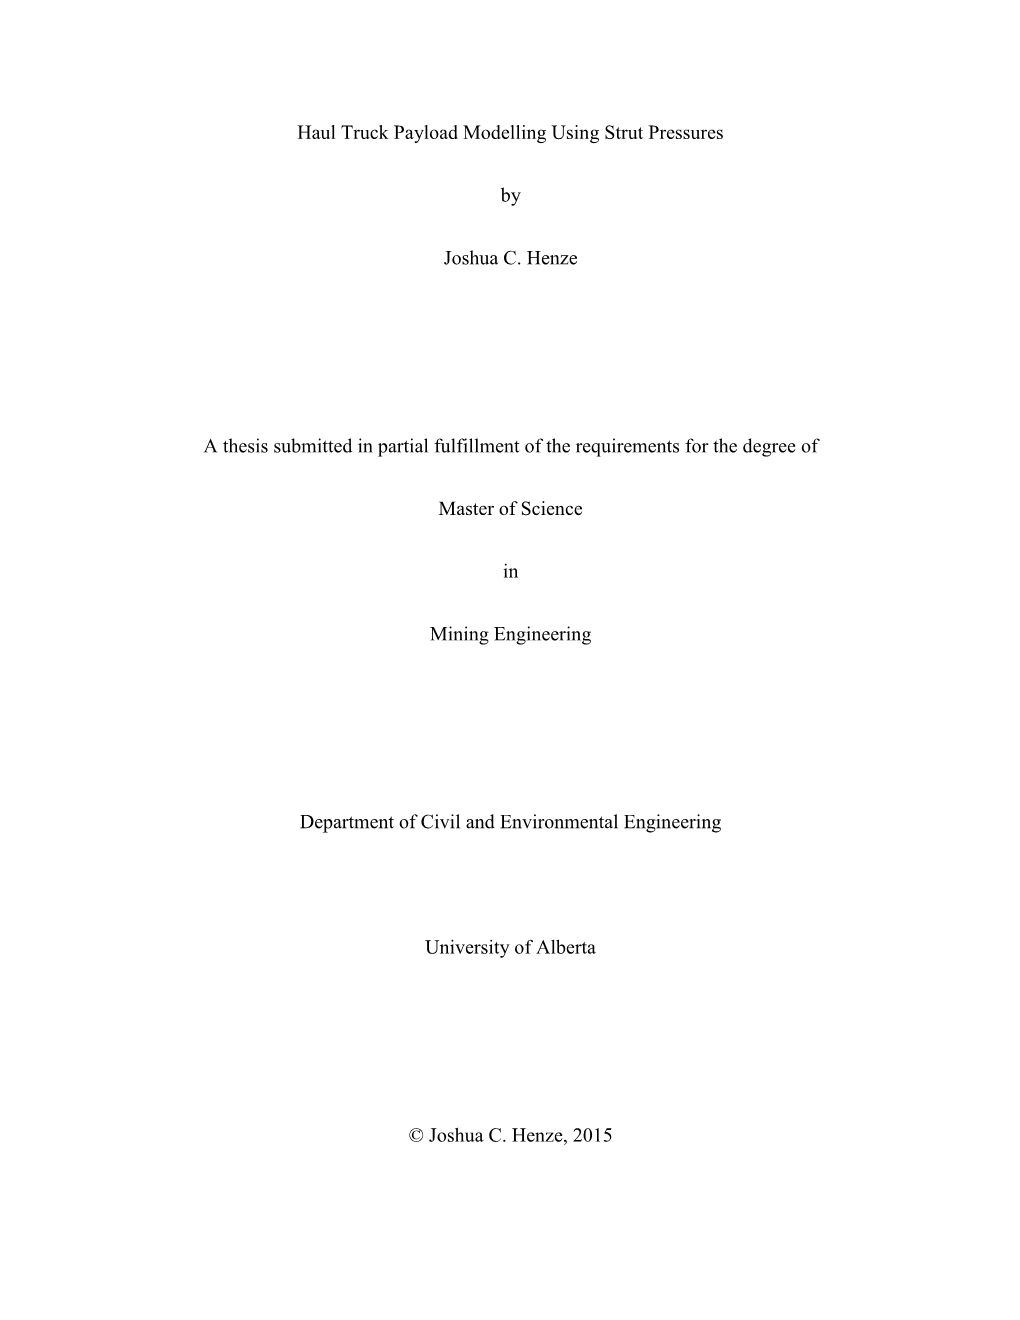 Haul Truck Payload Modelling Using Strut Pressures by Joshua C. Henze a Thesis Submitted in Partial Fulfillment of the Requireme